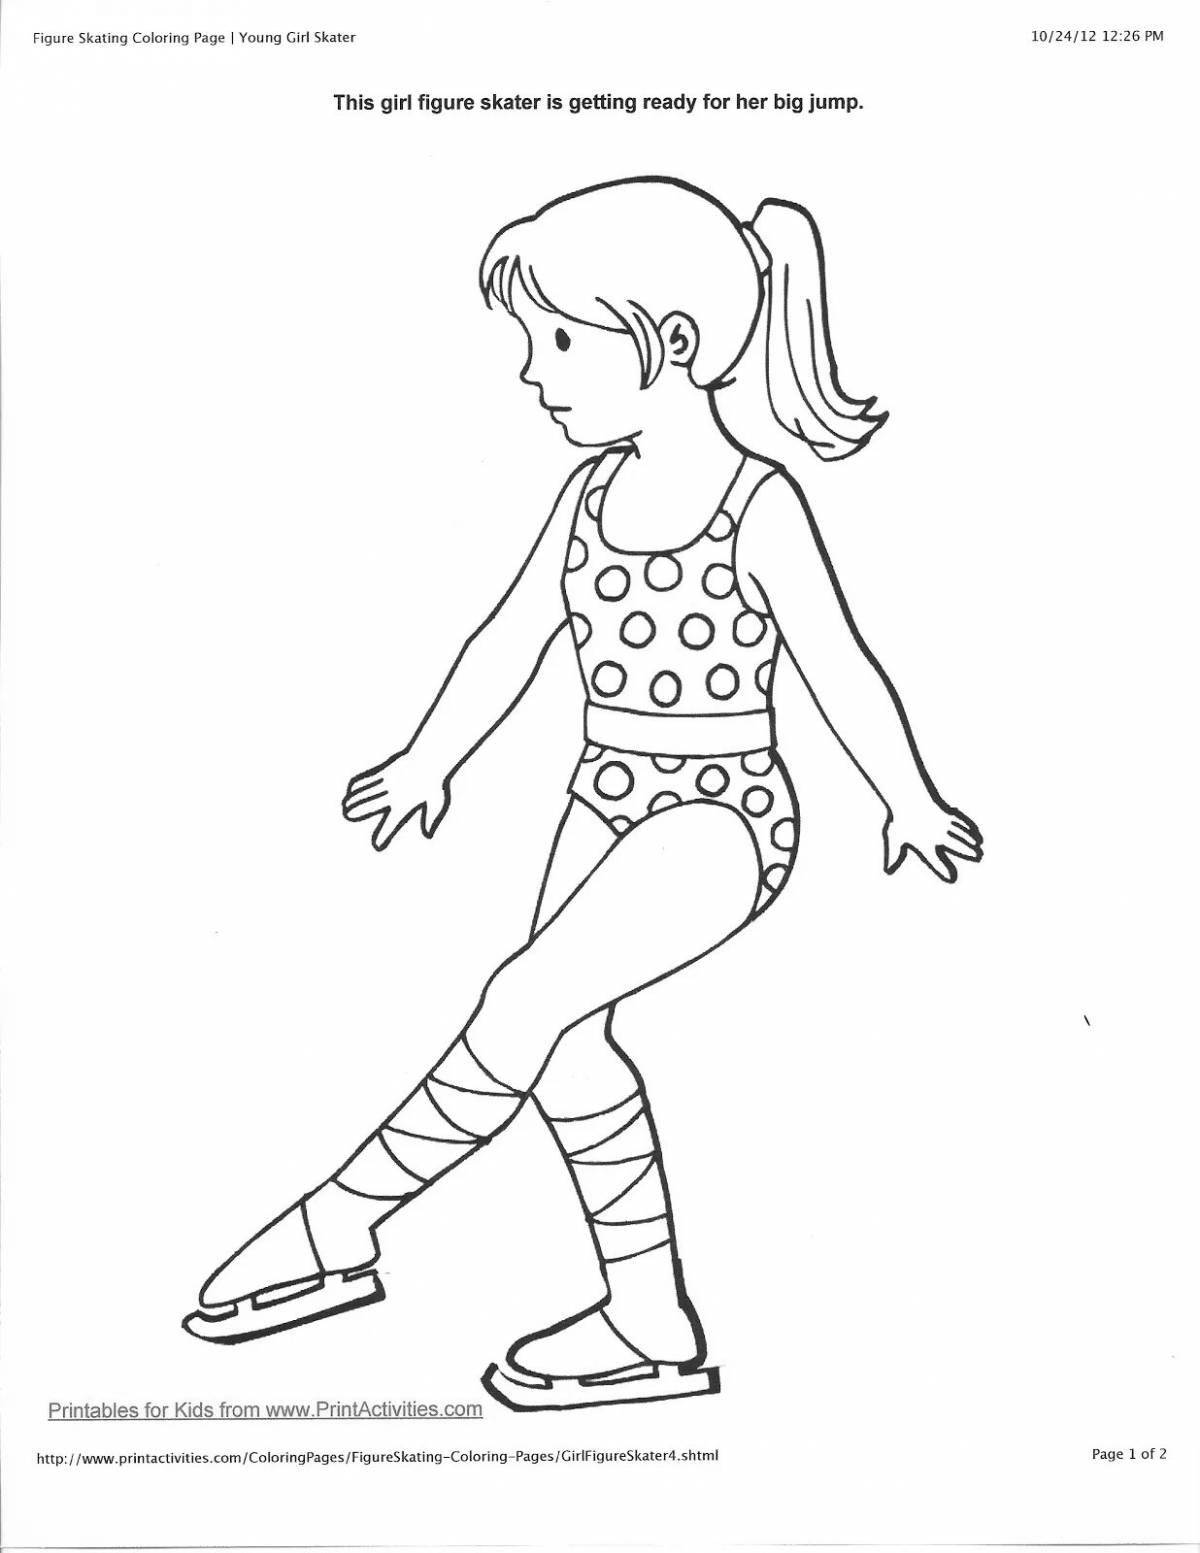 Live exercise coloring for children